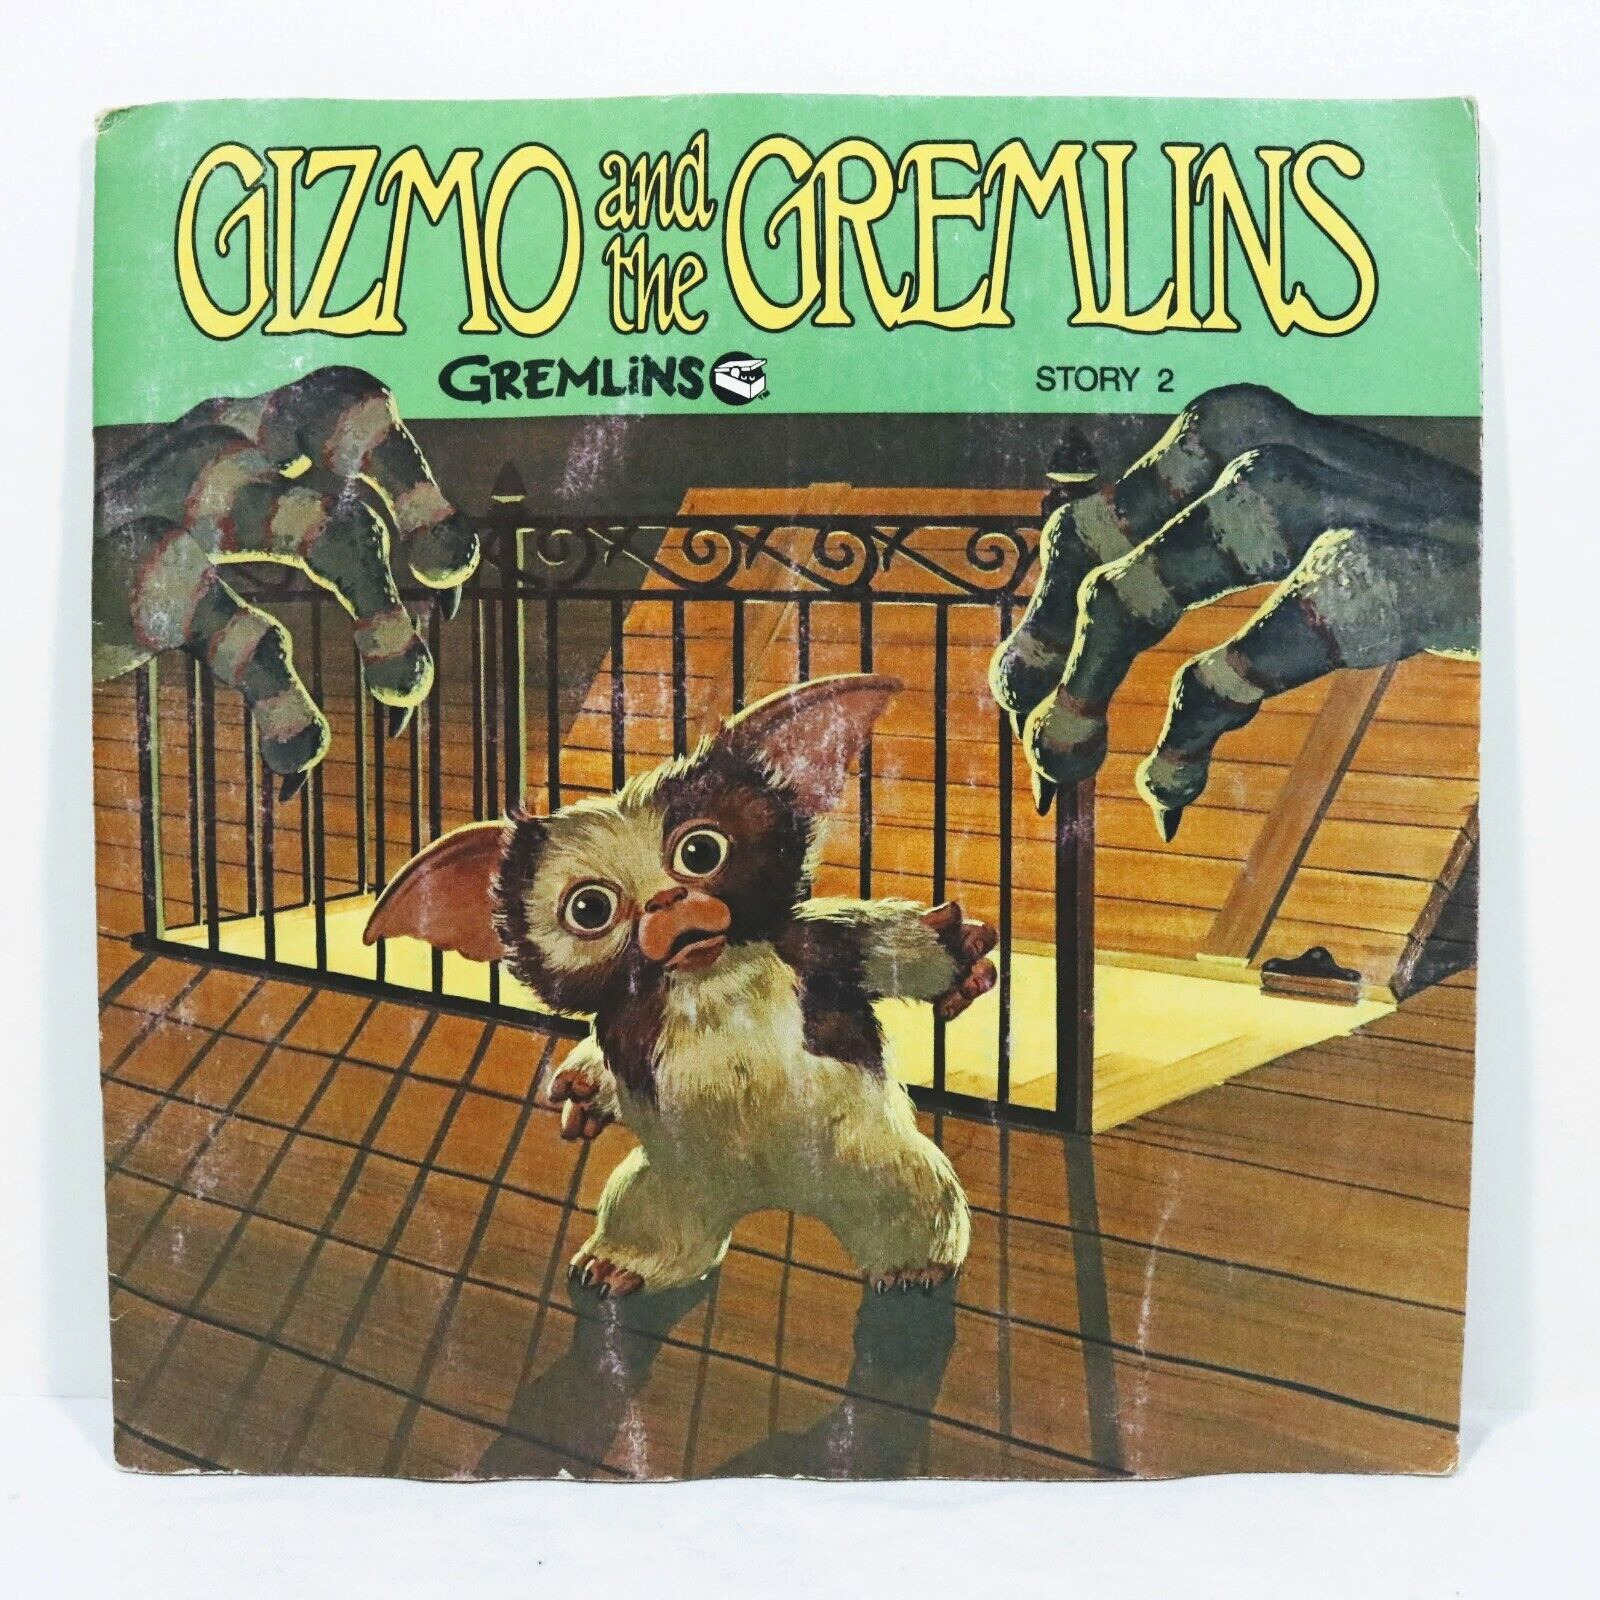 1984 Book and Record Gremlins Gizmo and the Gremlins Story 2